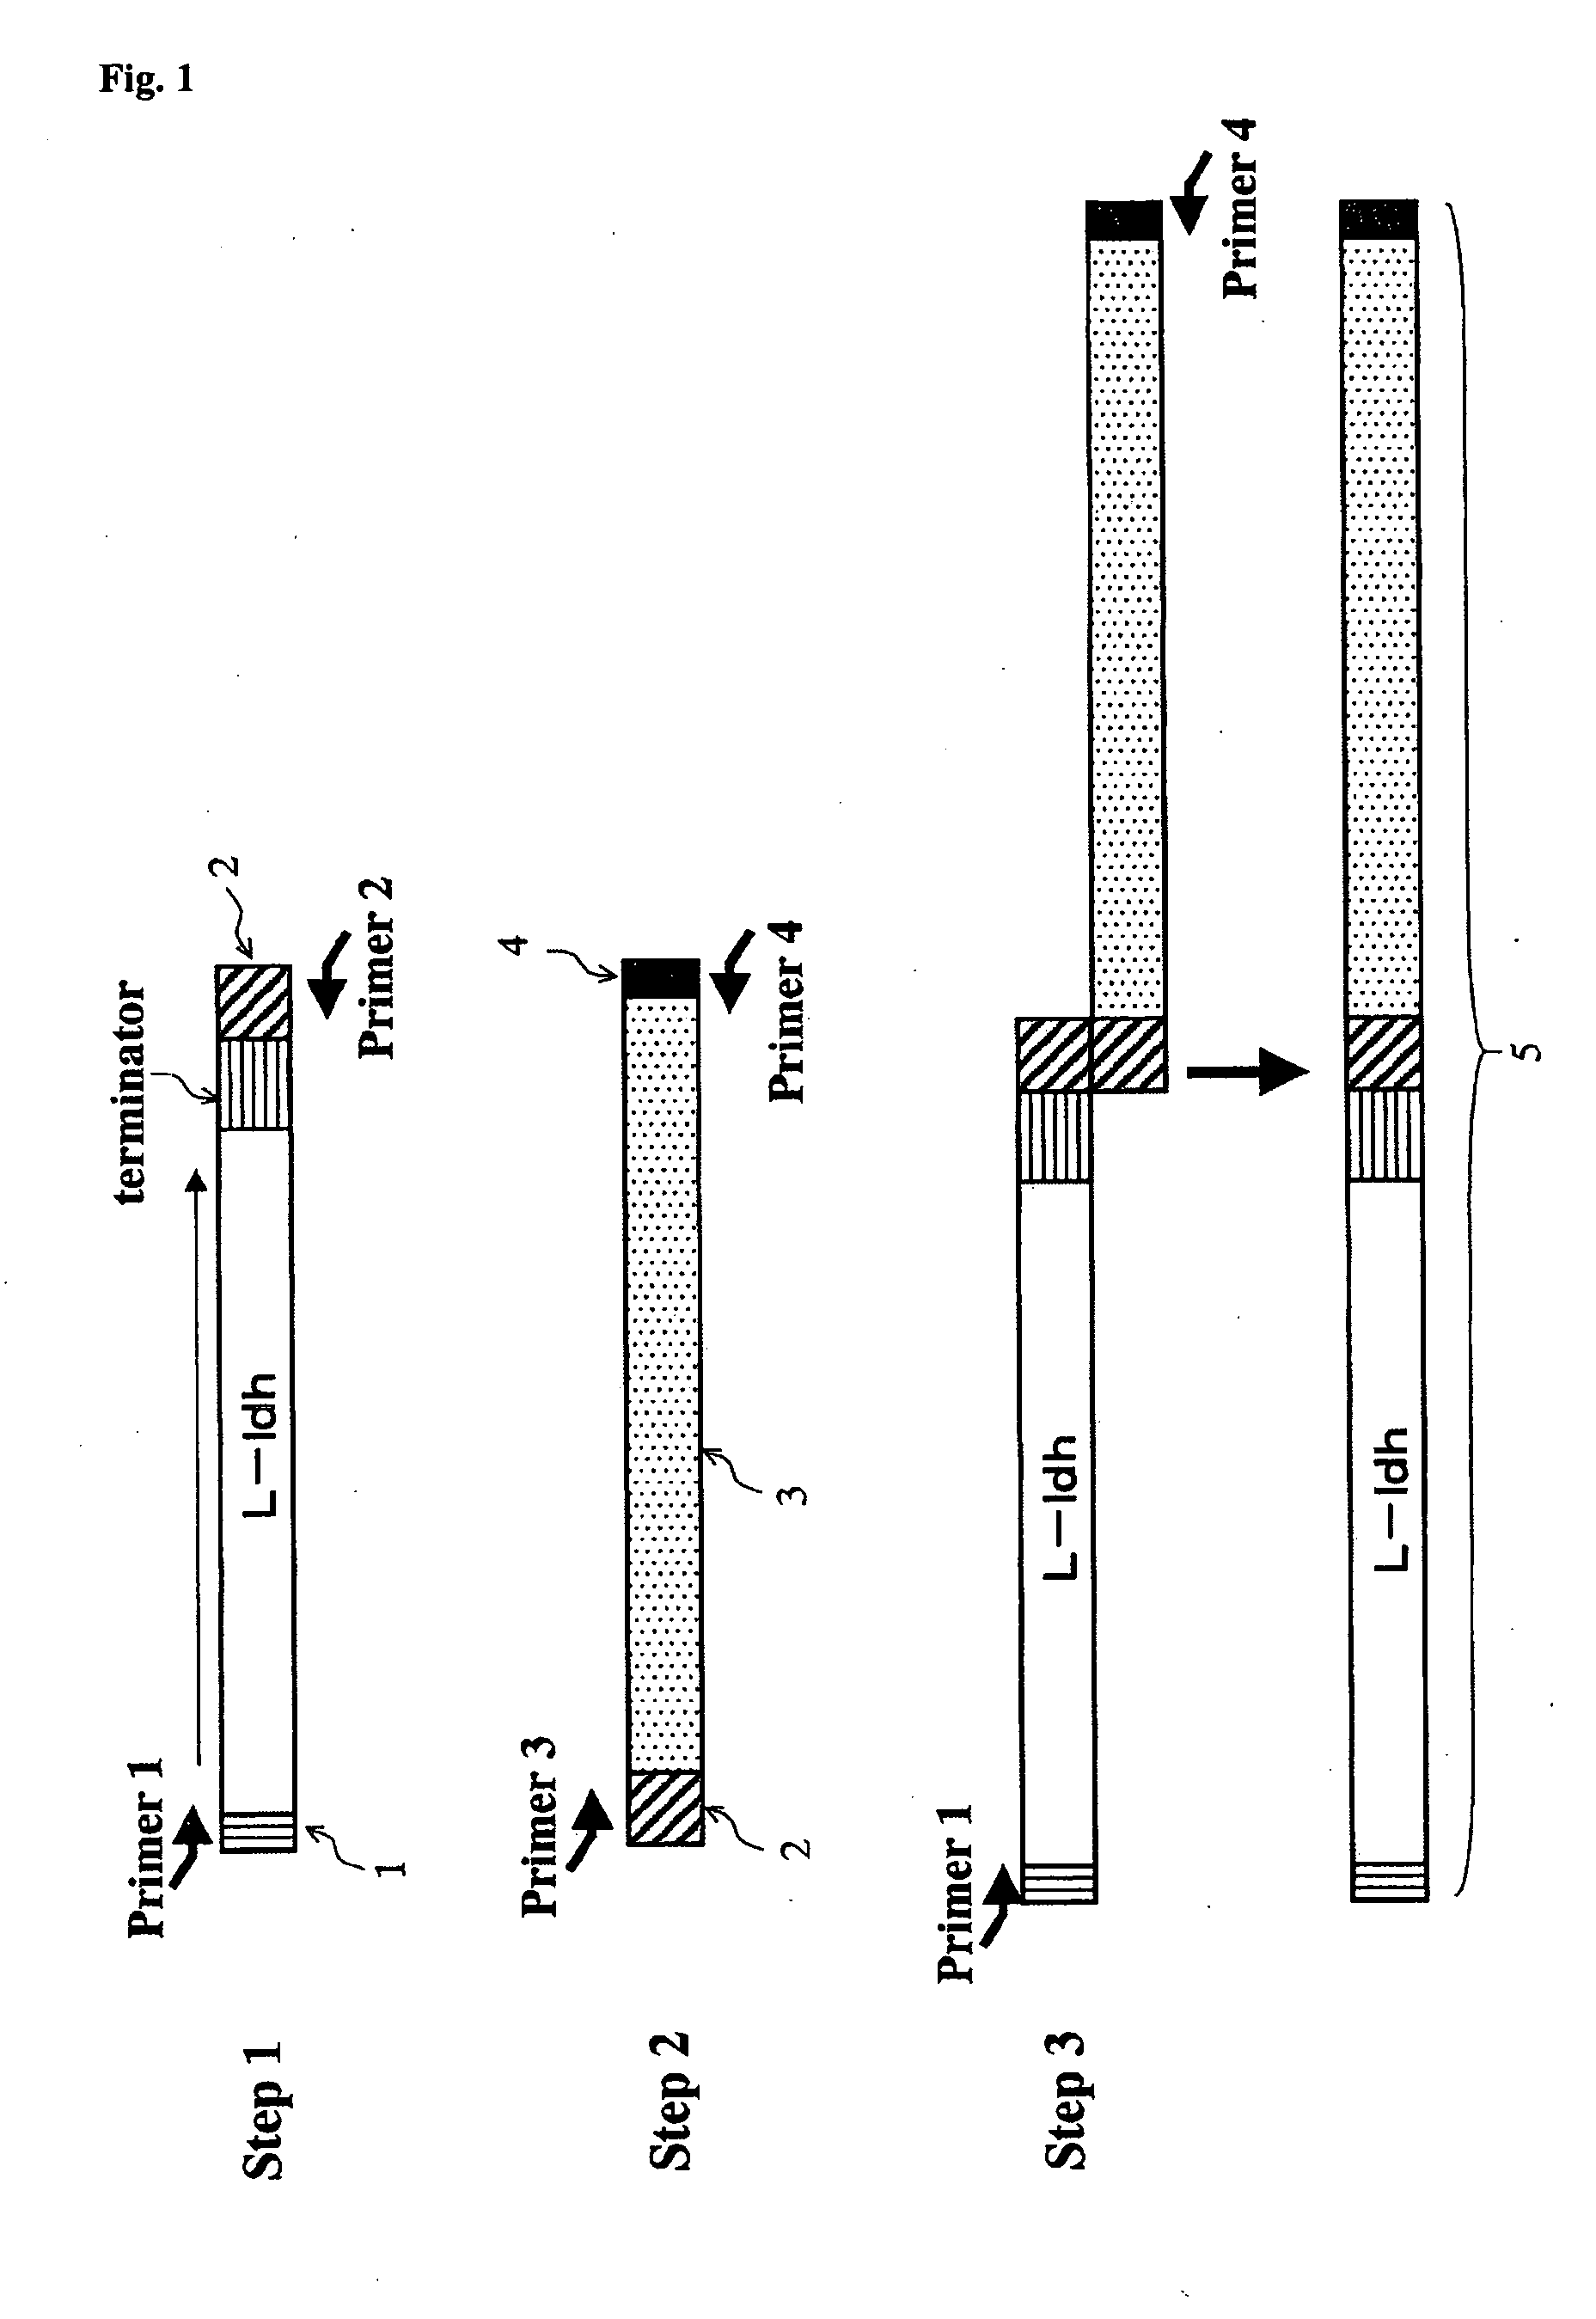 Yeast and Method of Producing L-Lactic Acid